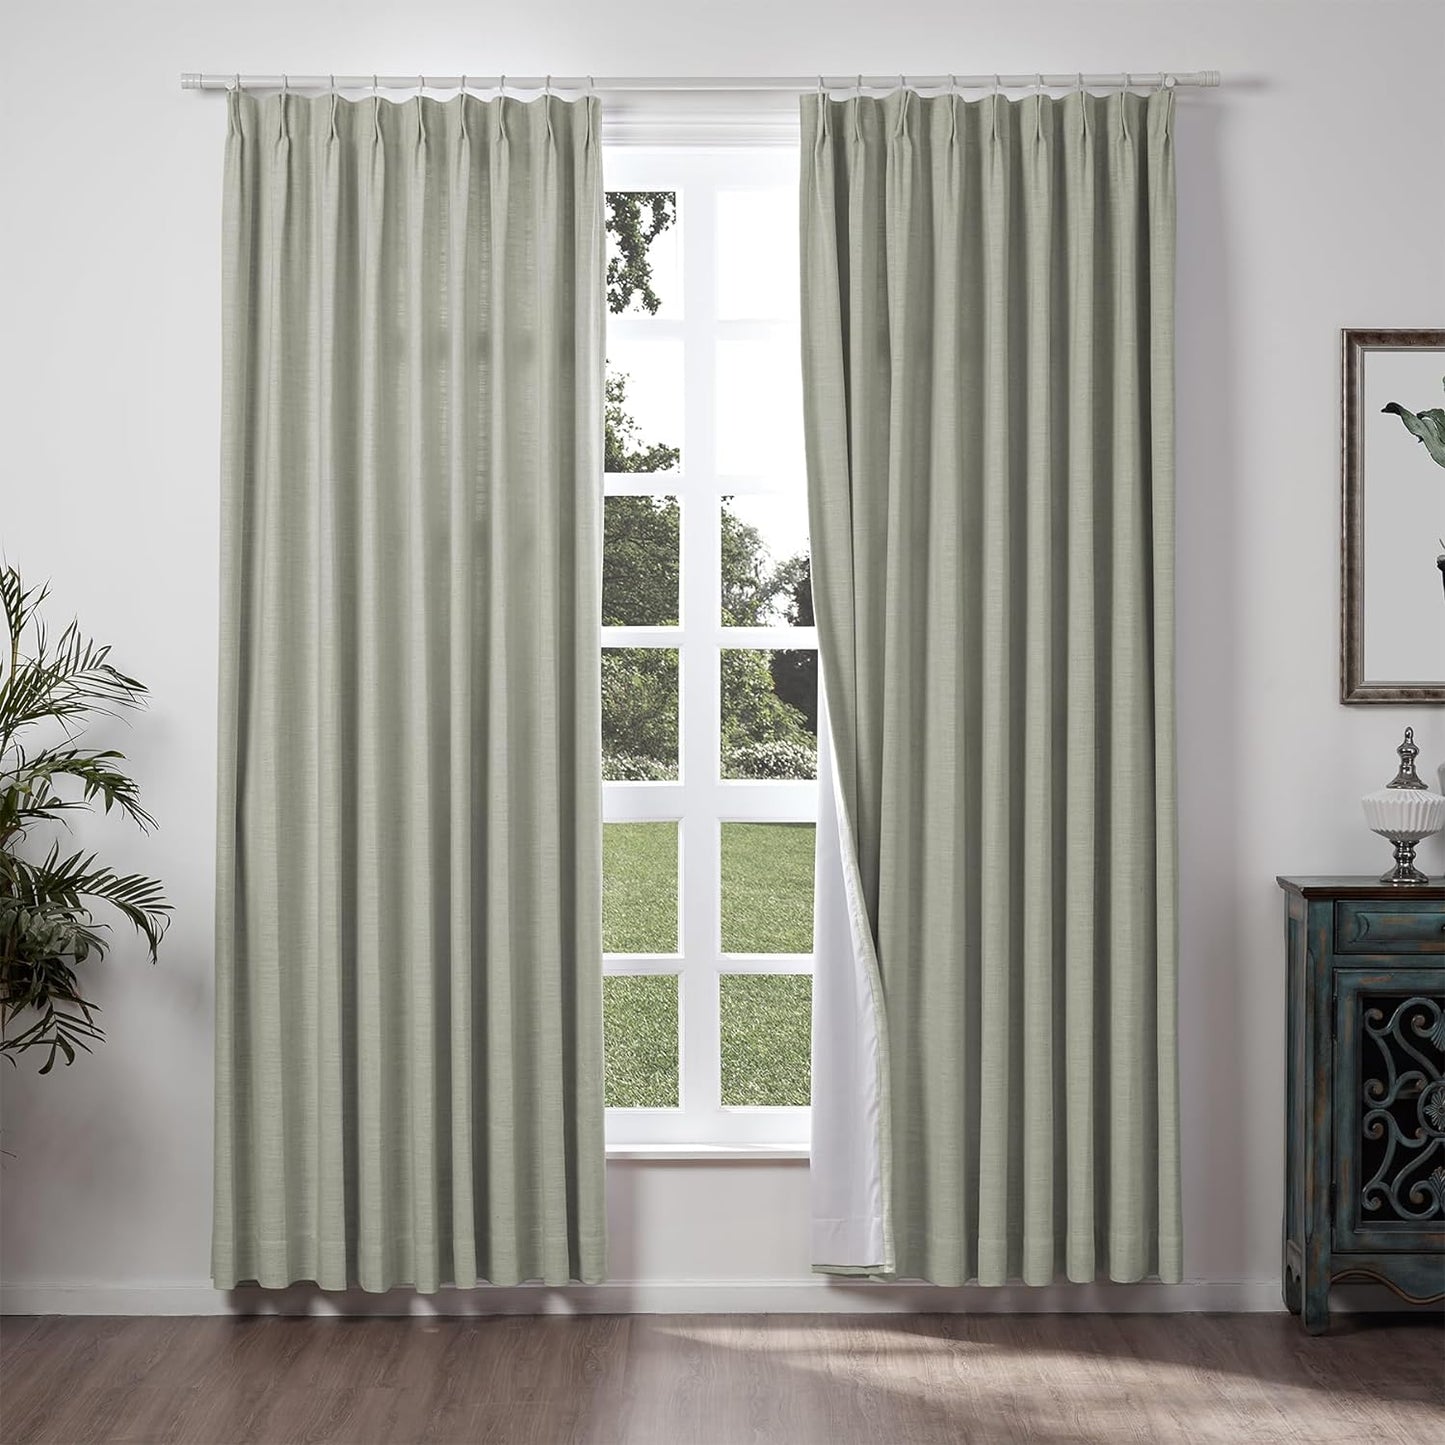 Chadmade 50" W X 63" L Polyester Linen Drape with Blackout Lining Pinch Pleat Curtain for Sliding Door Patio Door Living Room Bedroom, (1 Panel) Sand Beige Tallis Collection  ChadMade Light Gray (11) 50Wx84L 